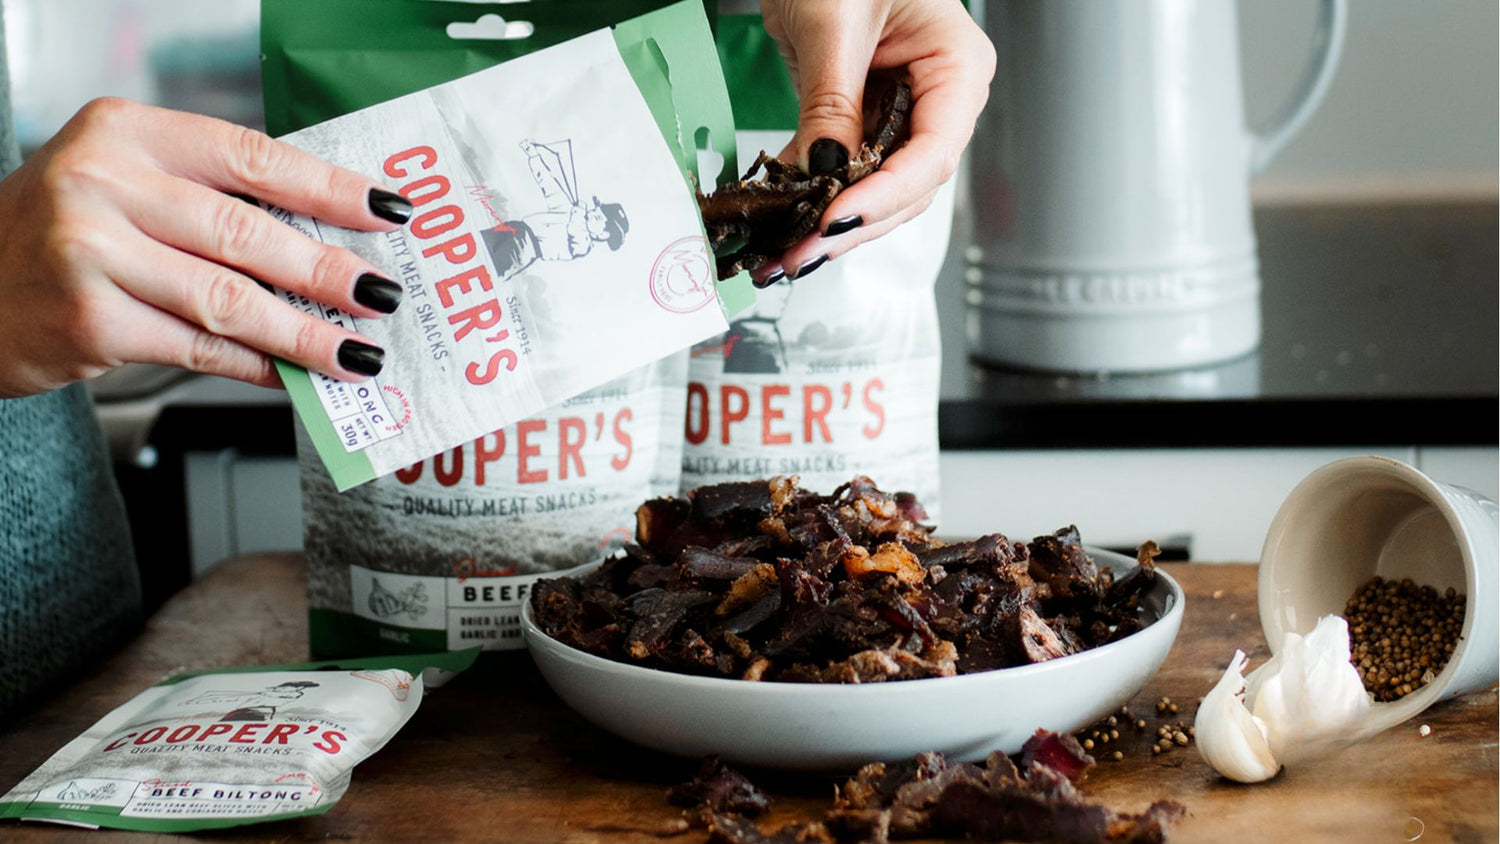 A pair of hands, adorned with dark polished nails, is captured delicately selecting pieces of Cooper's Beef Biltong from a package, adding to a bowlful of the savoury snack on a wooden kitchen worktop. Surrounding the scene are additional packets of Cooper's Biltong, a classic kettle, and culinary essentials such as coriander seeds and garlic, all contributing to a homely British kitchen setting.